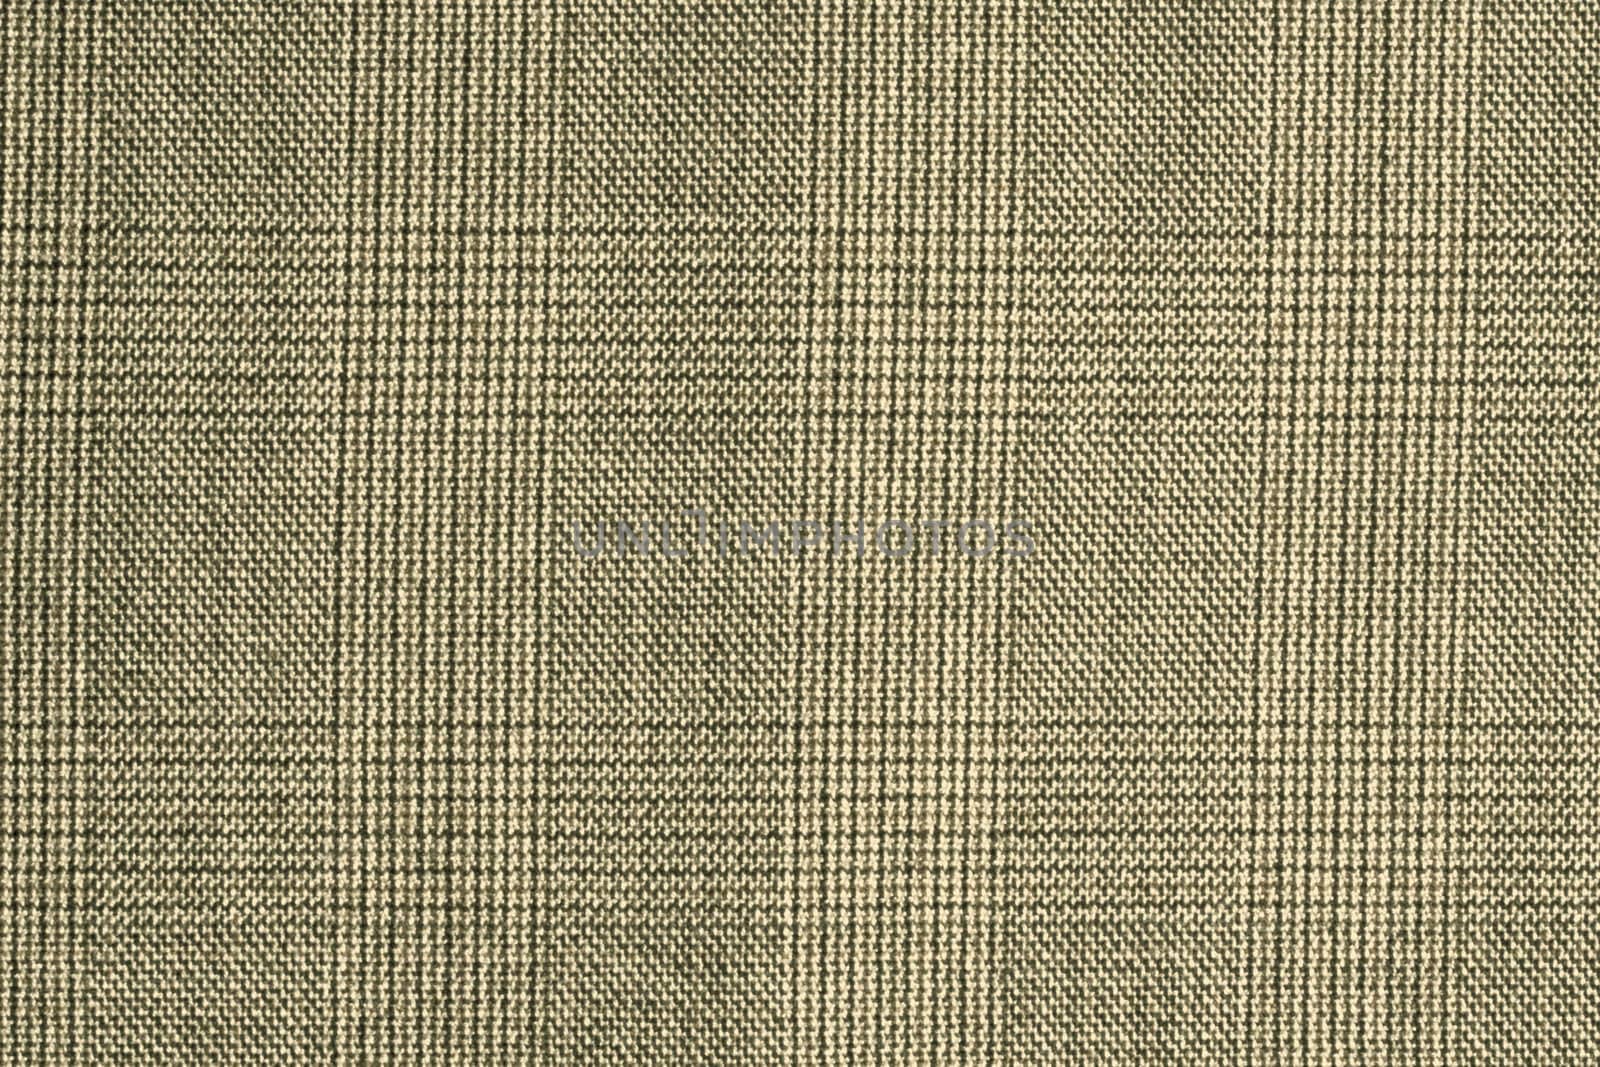 Texture of Checkered brown fabric background 